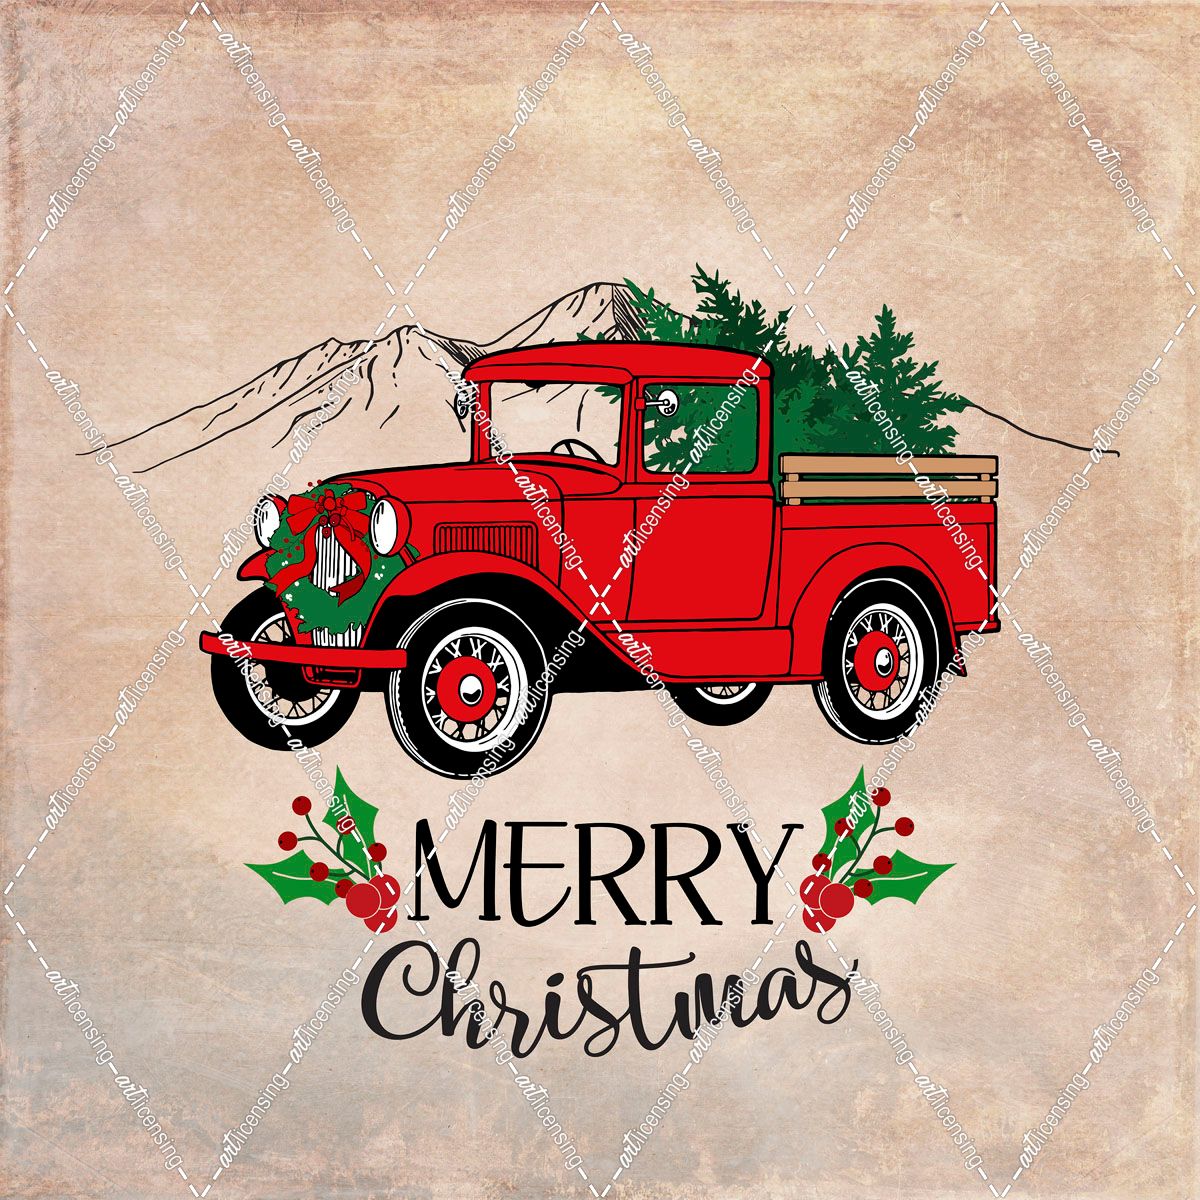 Red Ford Christmas Truck